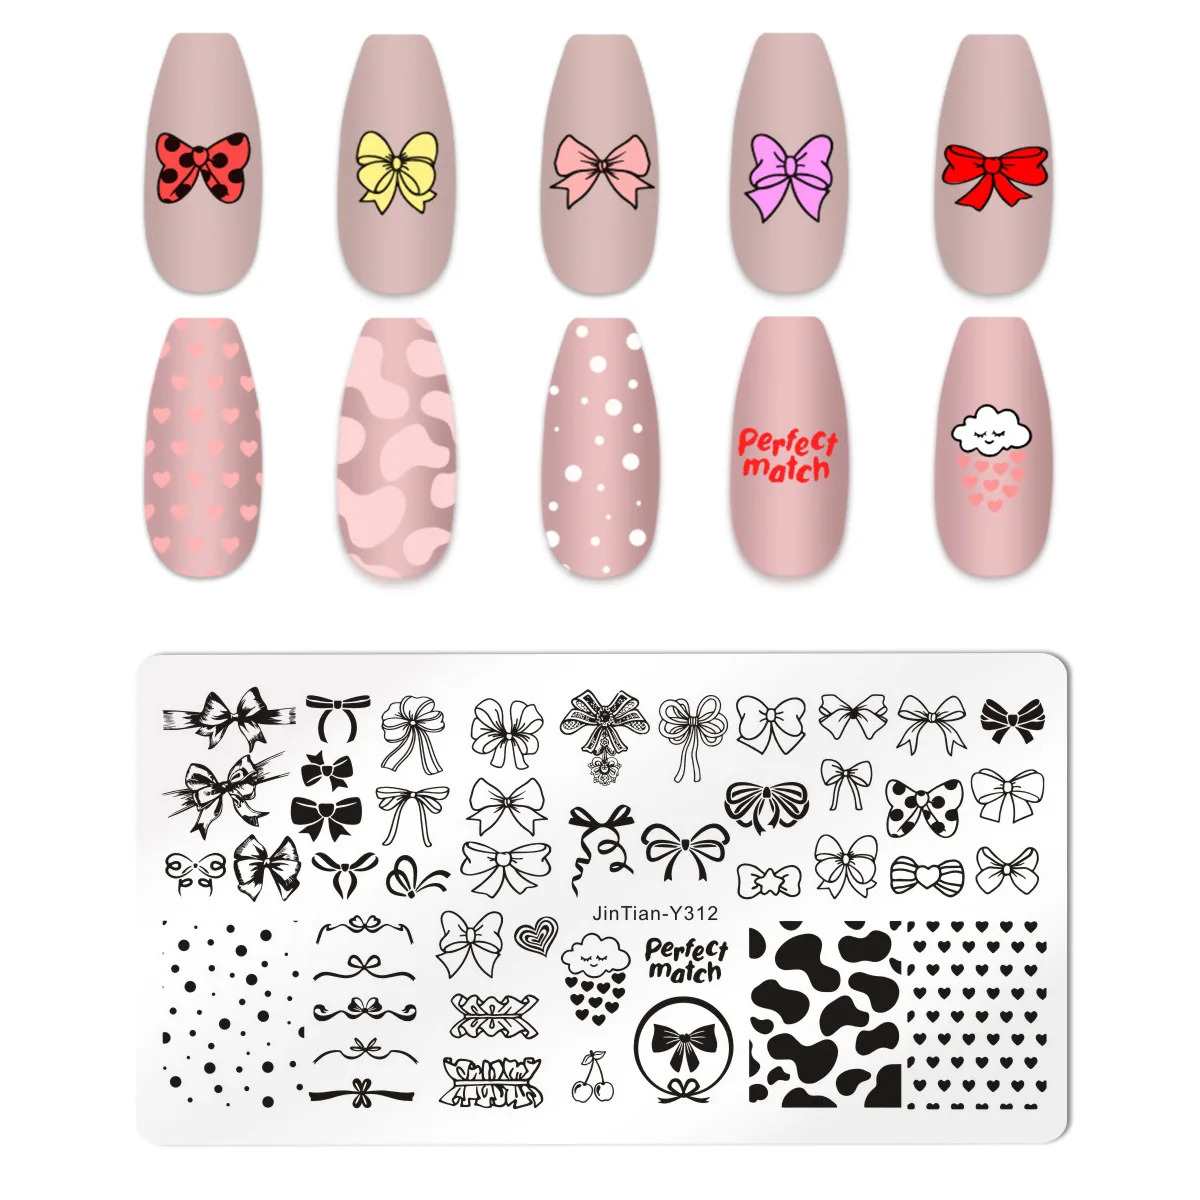 

Bow Butterfly Nail Stamping Butterfly Pattern Flower Dragonfly Stamping Plate Different Butterflies Designed Nails Mold For Lady